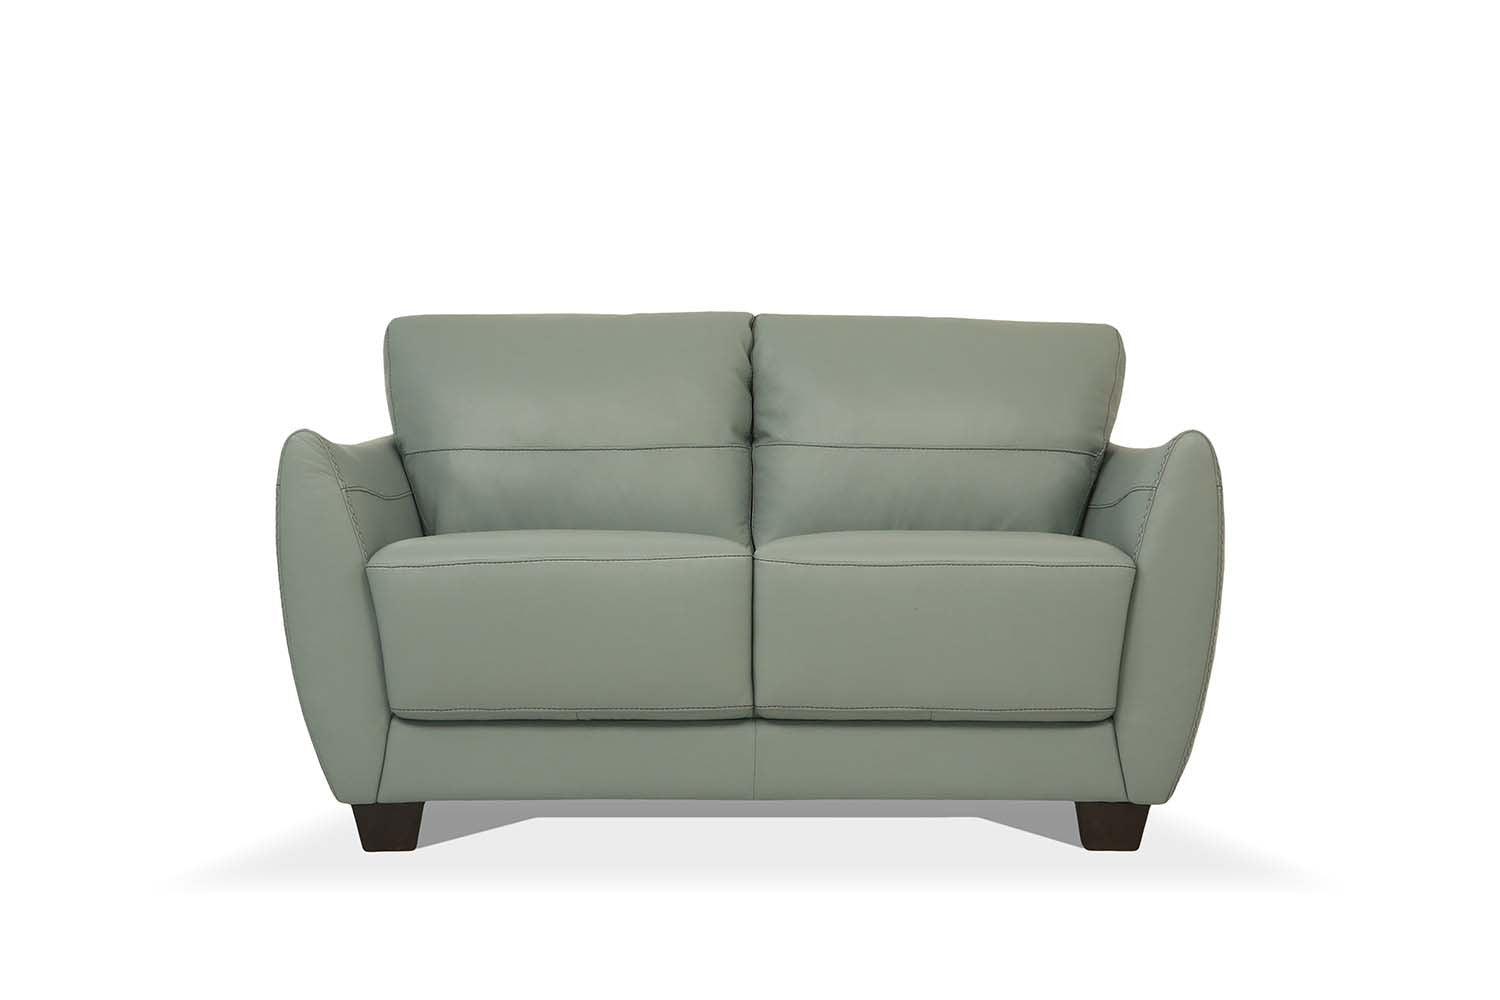 57" Pale Green Leather And Black Love Seat